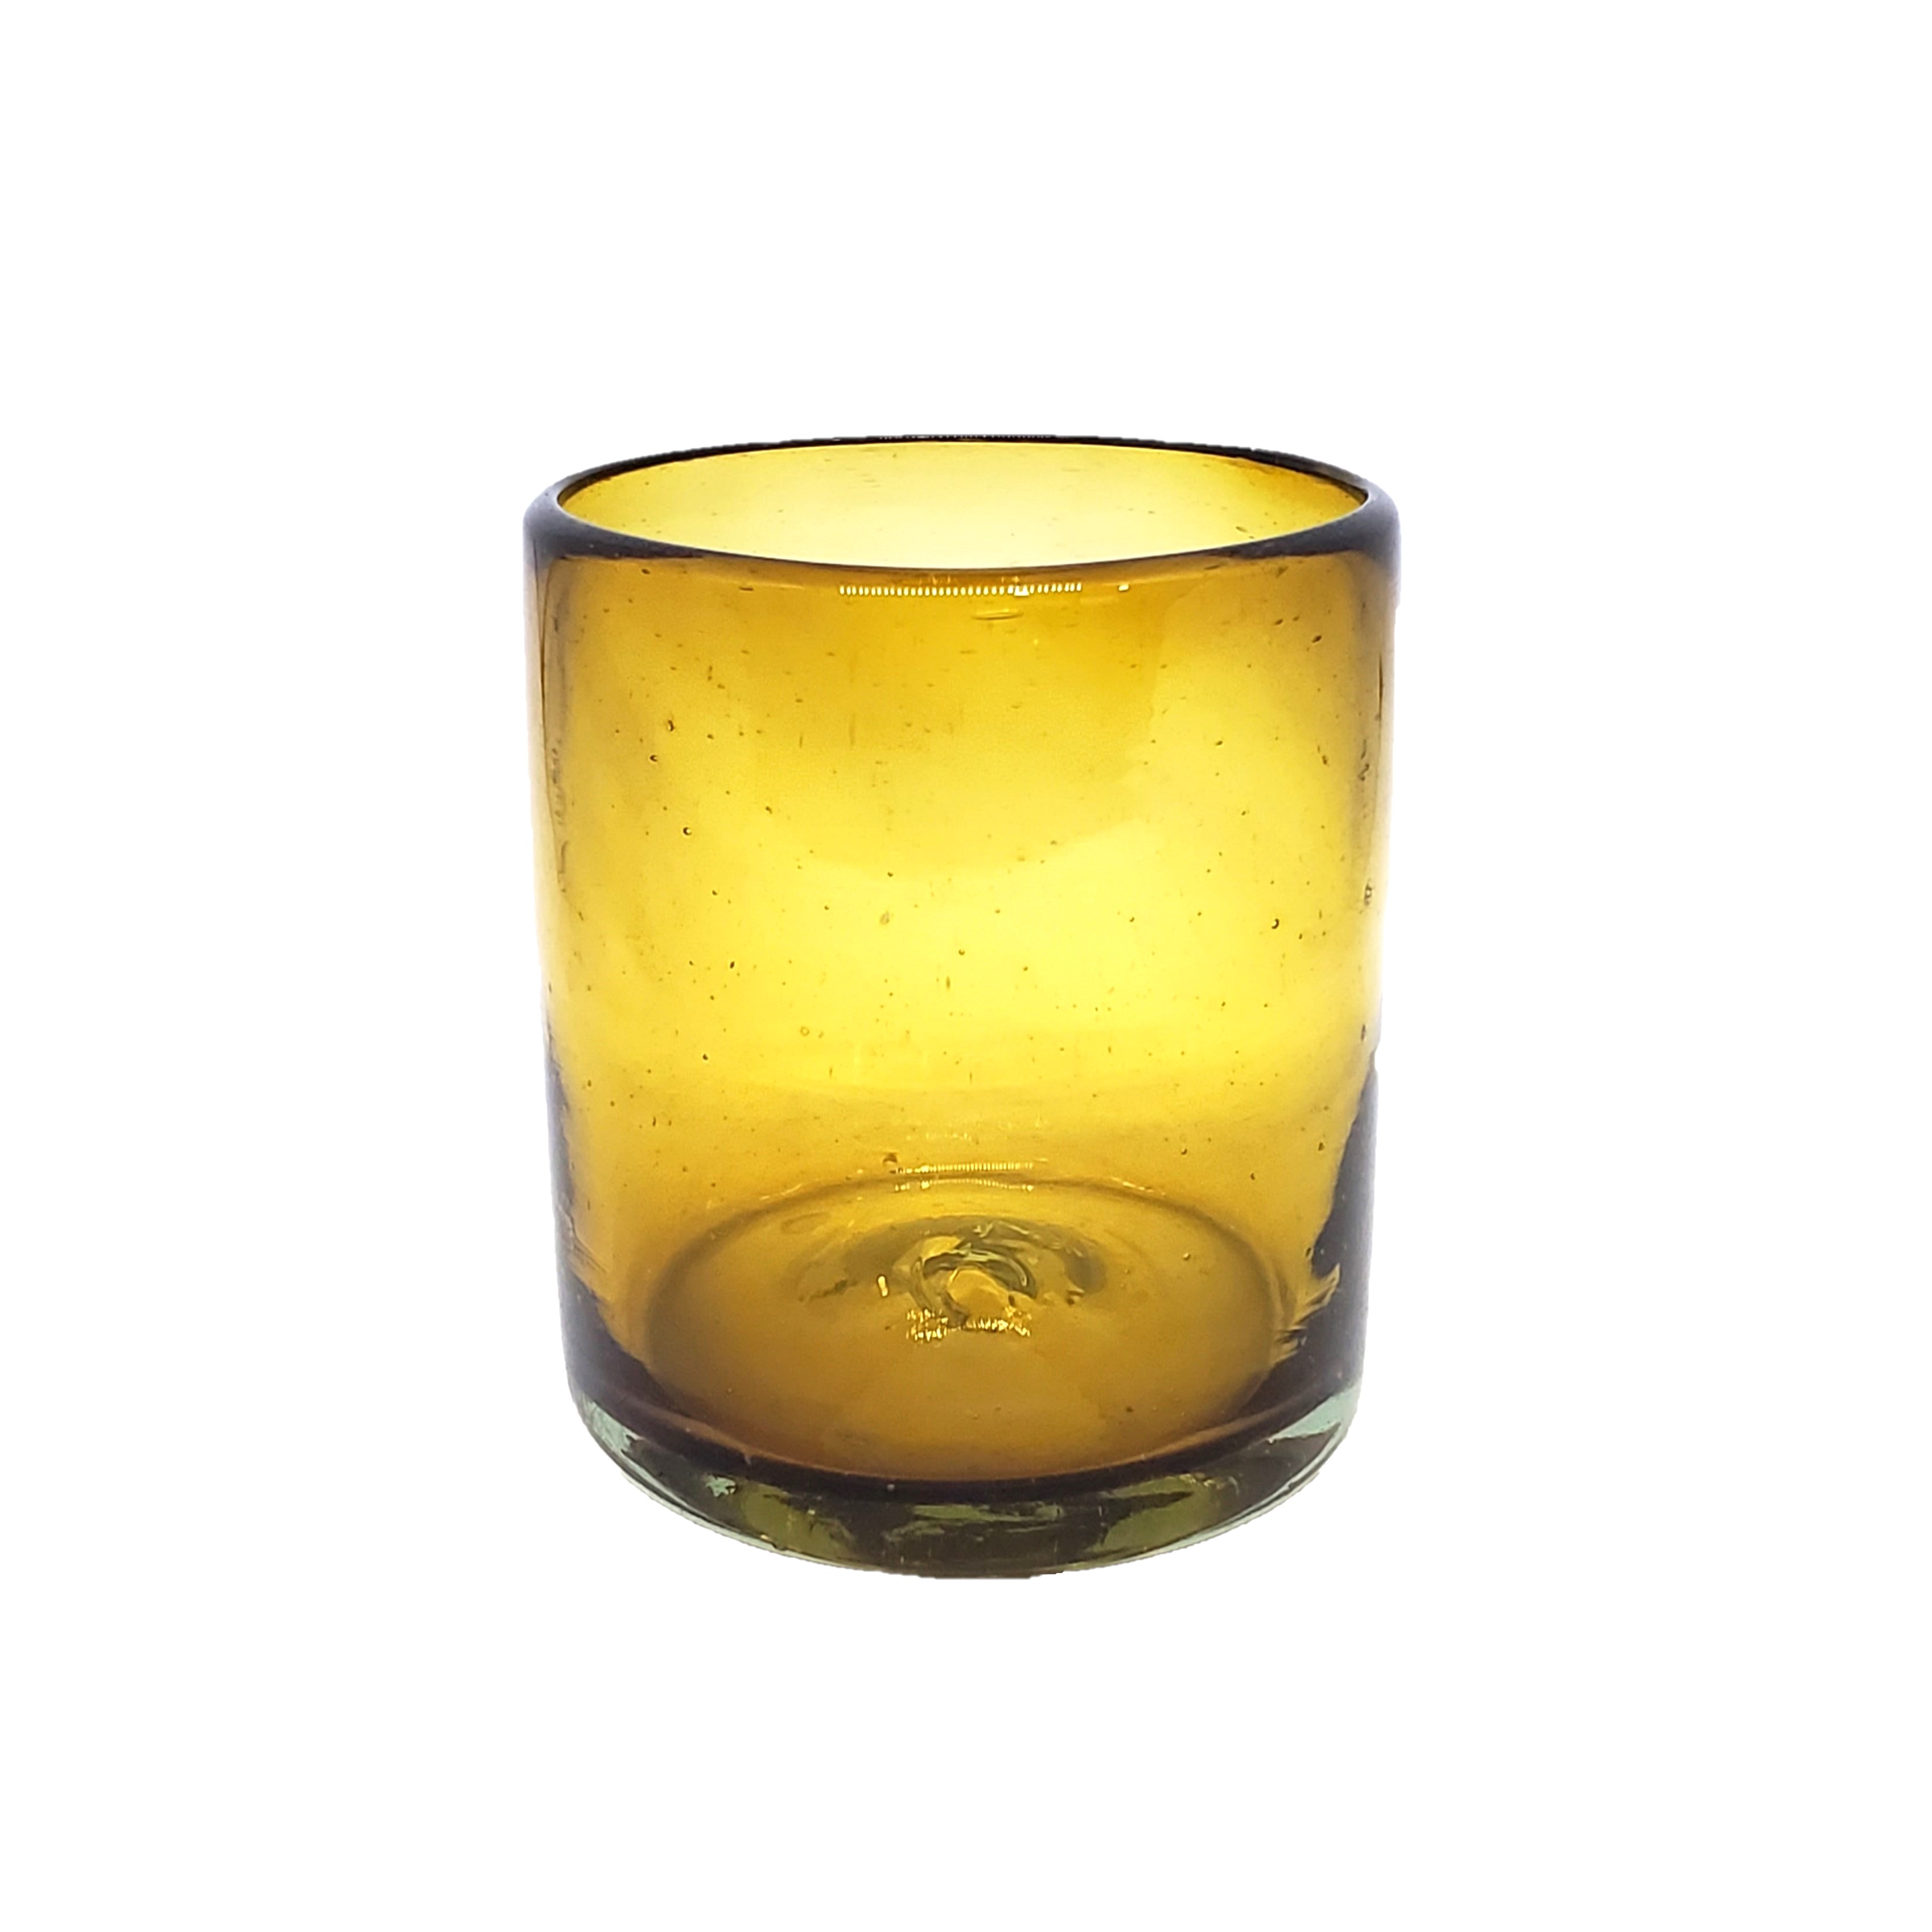 Wholesale Mexican Glasses / Solid Amber 9 oz Short Tumblers  / Enhance your favorite drink with these colorful handcrafted glasses.